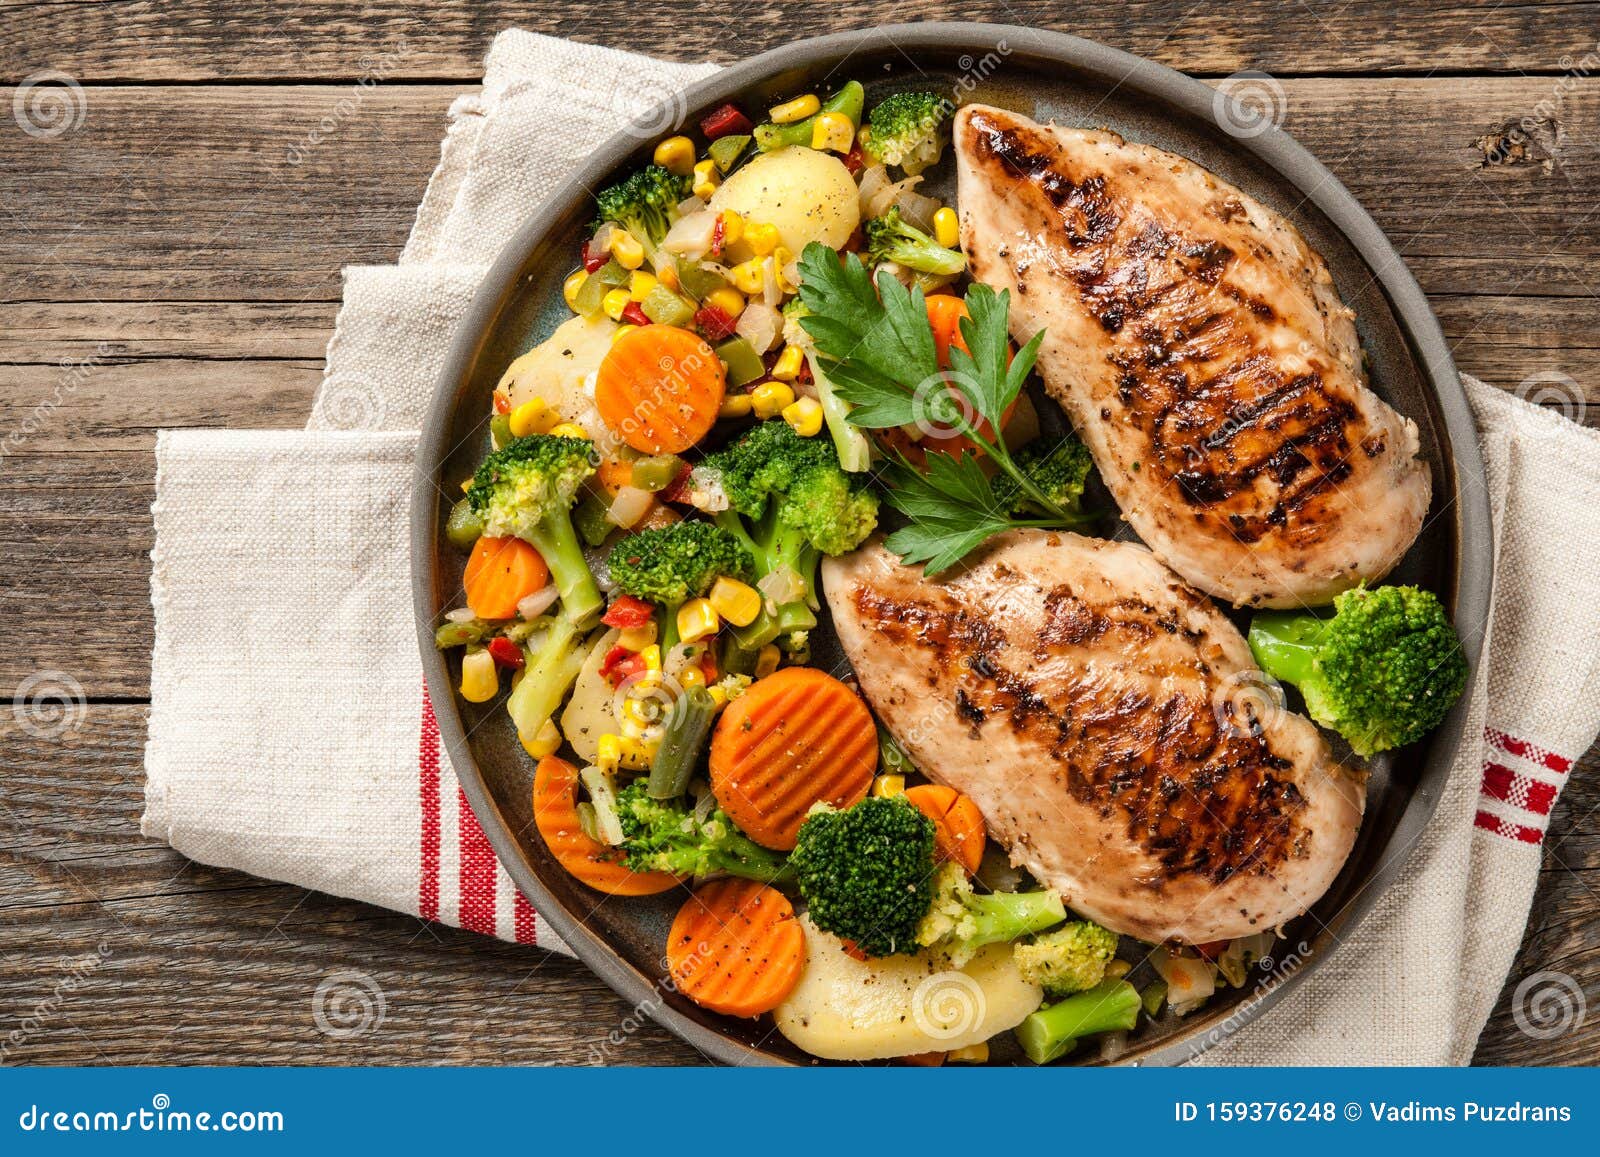 launch Circus B.C. Grilled Chicken Breasts with Vegetables Stock Photo - Image of healthy,  plate: 159376248